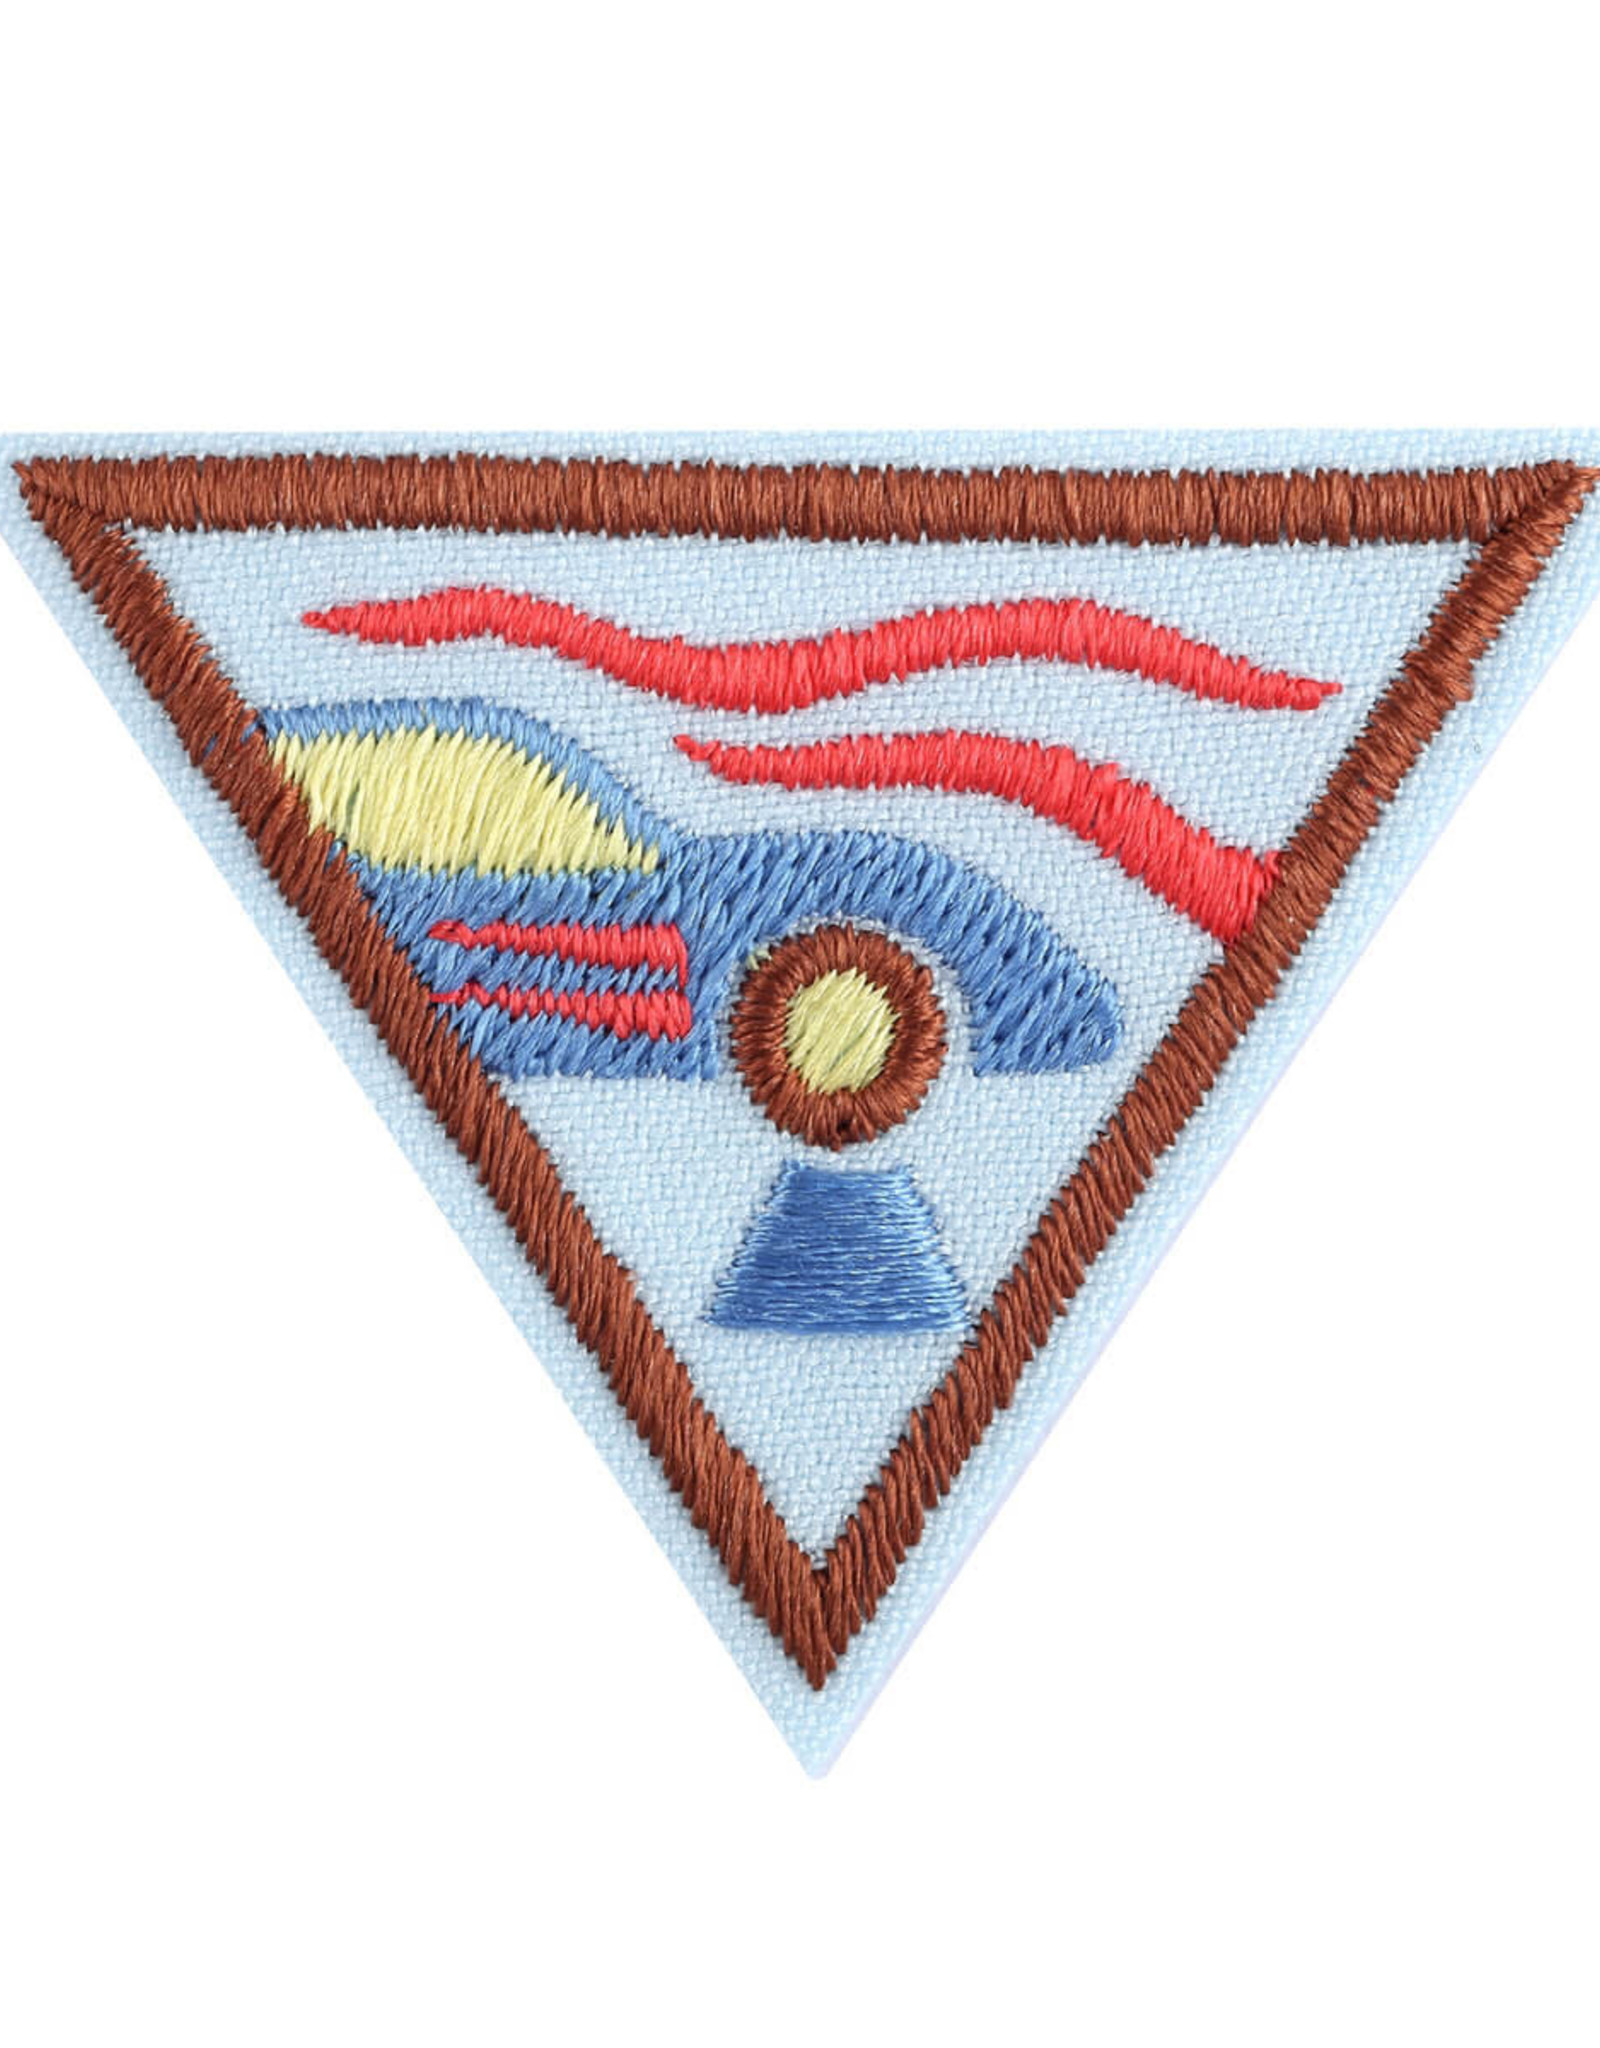 GIRL SCOUTS OF THE USA Brownie Automotive 2: Engineering Badge